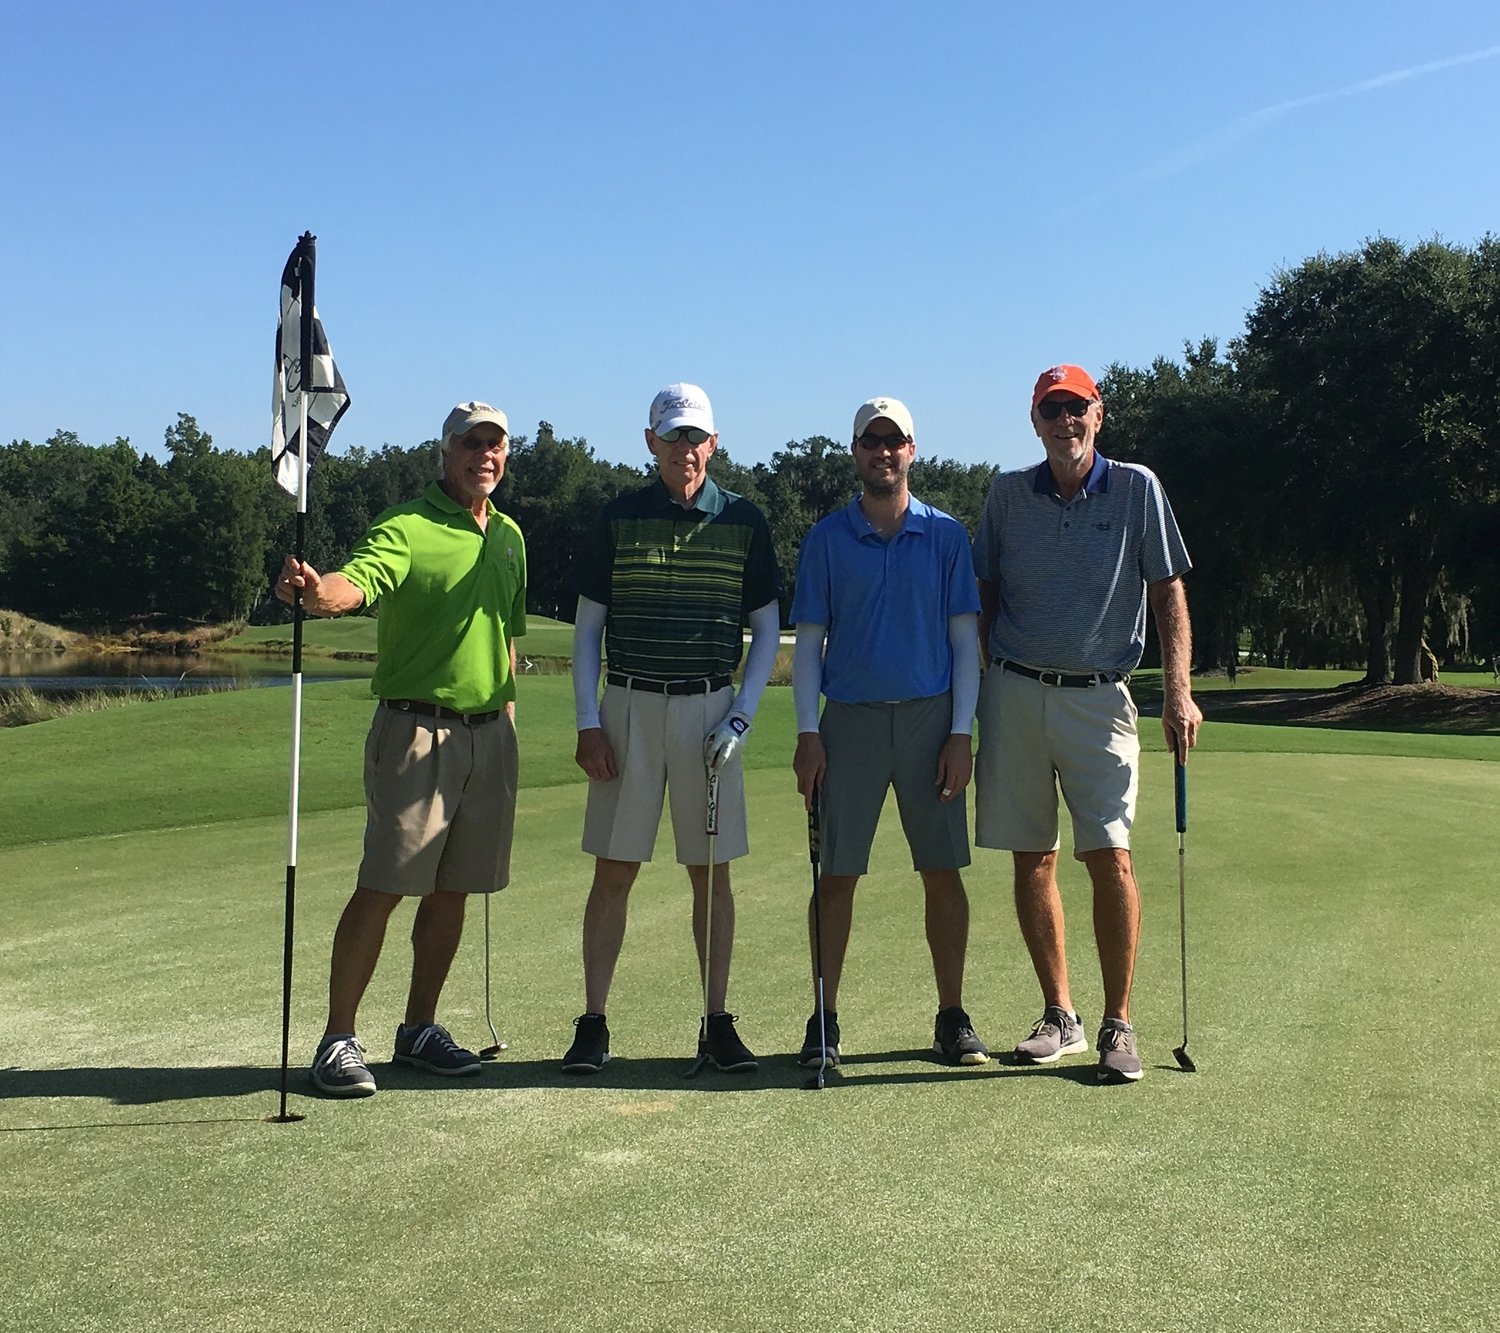 The Red Harvest Management/VanRysdam Team was one of the participating teams at the 2020 COA Champions for Elders Golf Tournament Fundraiser. This year’s fundraiser is scheduled for Aug. 16.